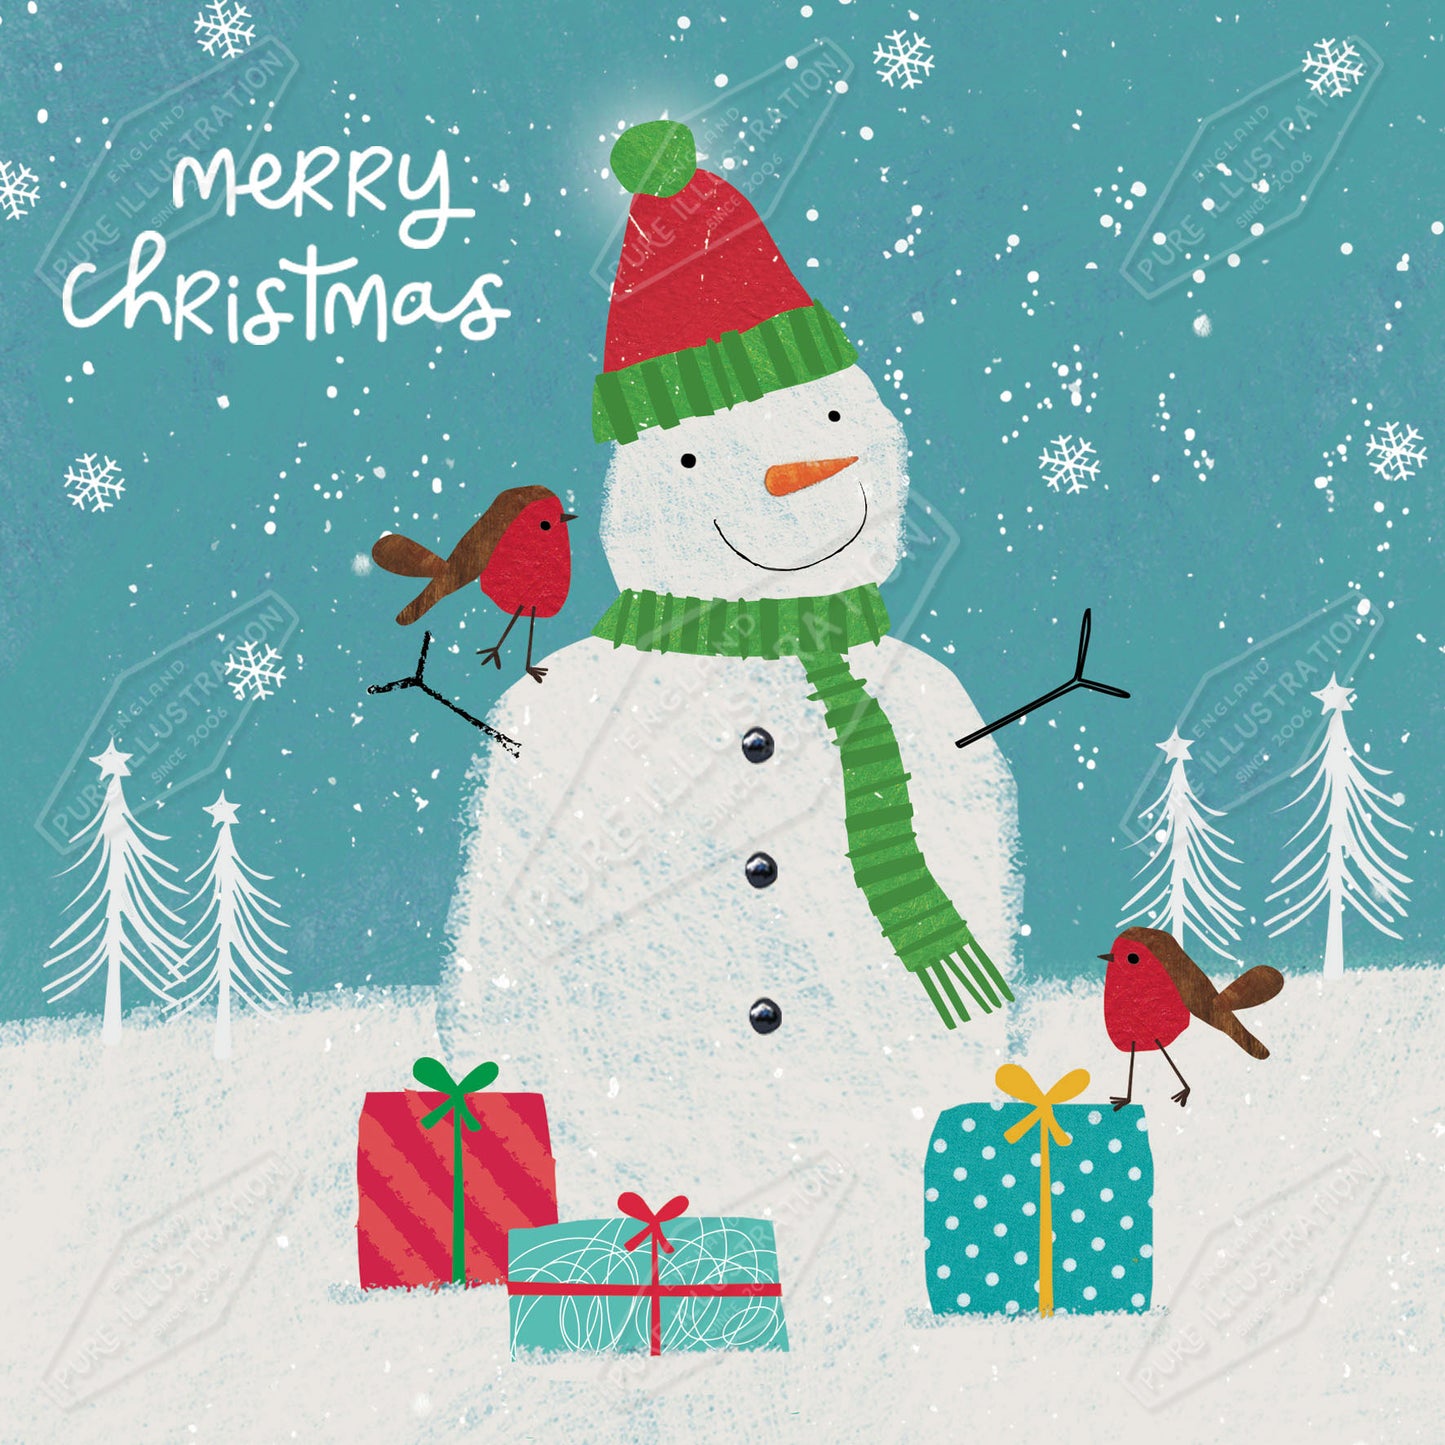 00035041IMC - Snowman Christmas Design by Isla McDonald for Pure Art Licensing Agency International Product & Packaging Surface Design 